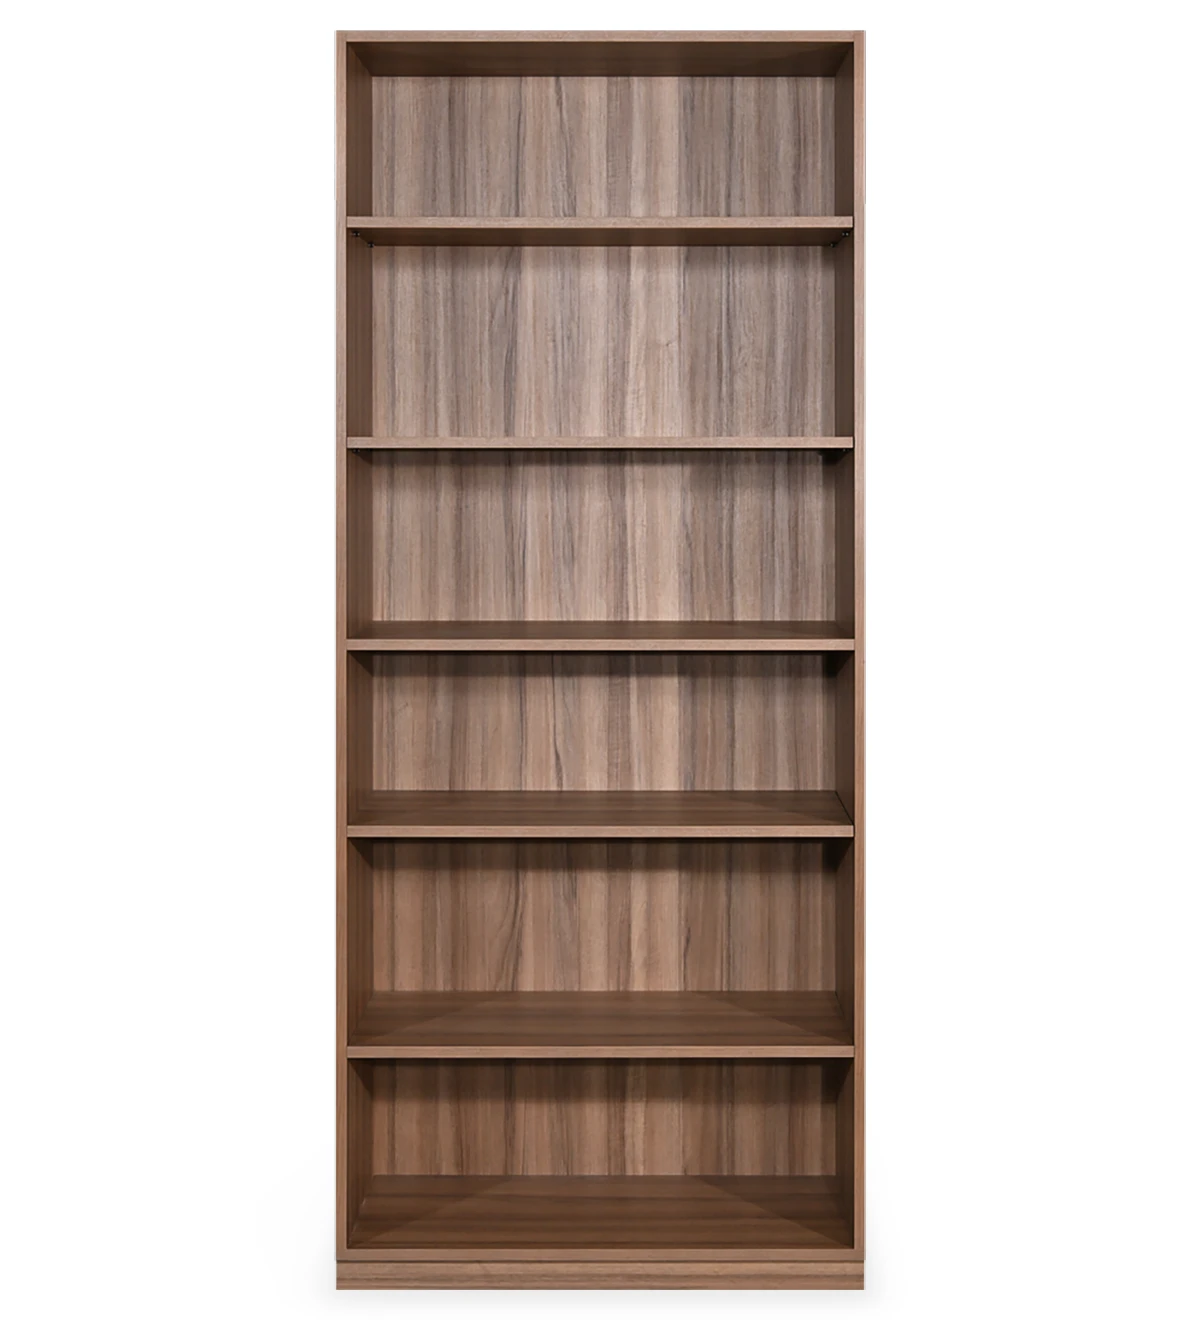 Tall bookcase in walnut, with removable shelves.